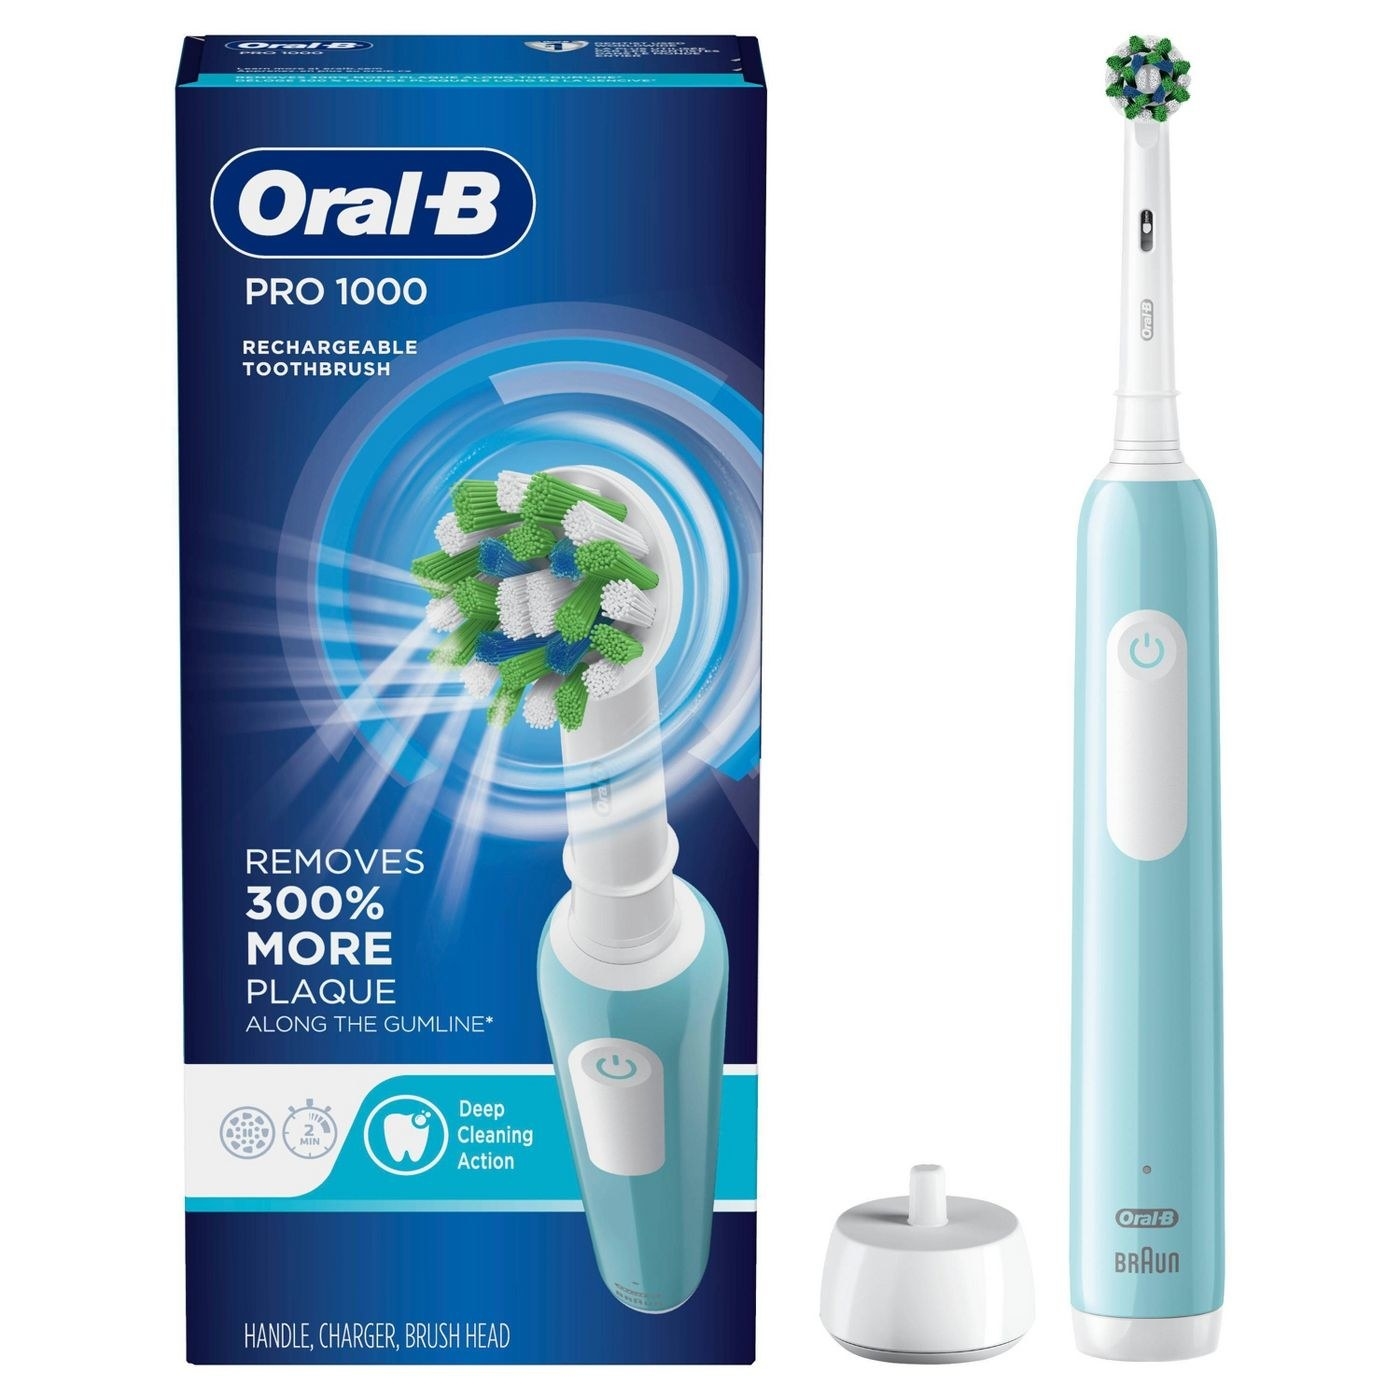 The electric toothbrush in white